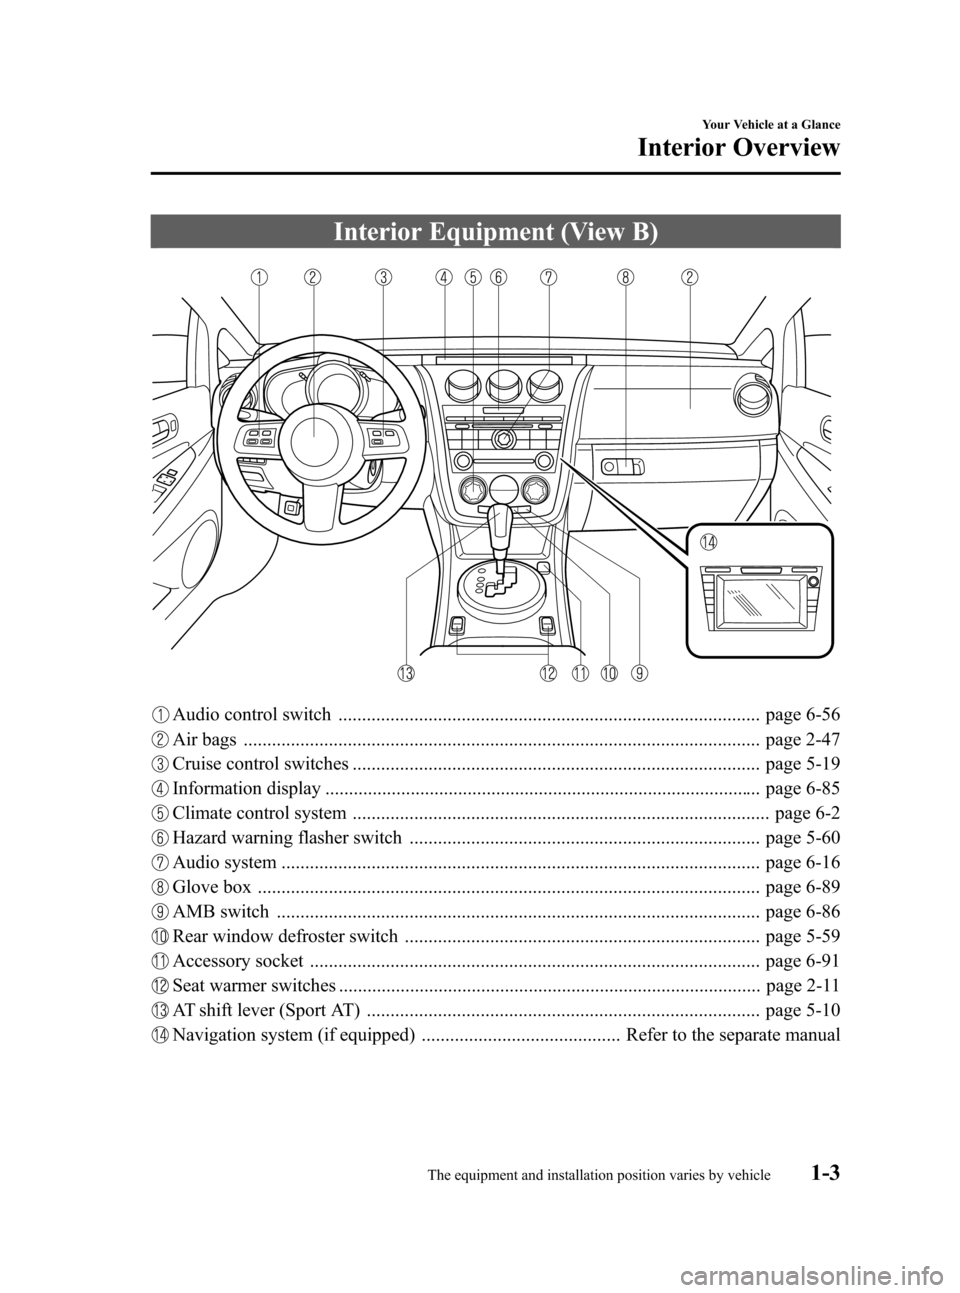 MAZDA MODEL CX-7 2009  Owners Manual (in English) Black plate (9,1)
Interior Equipment (View B)
Audio control switch ......................................................................................... page 6-56
Air bags ........................